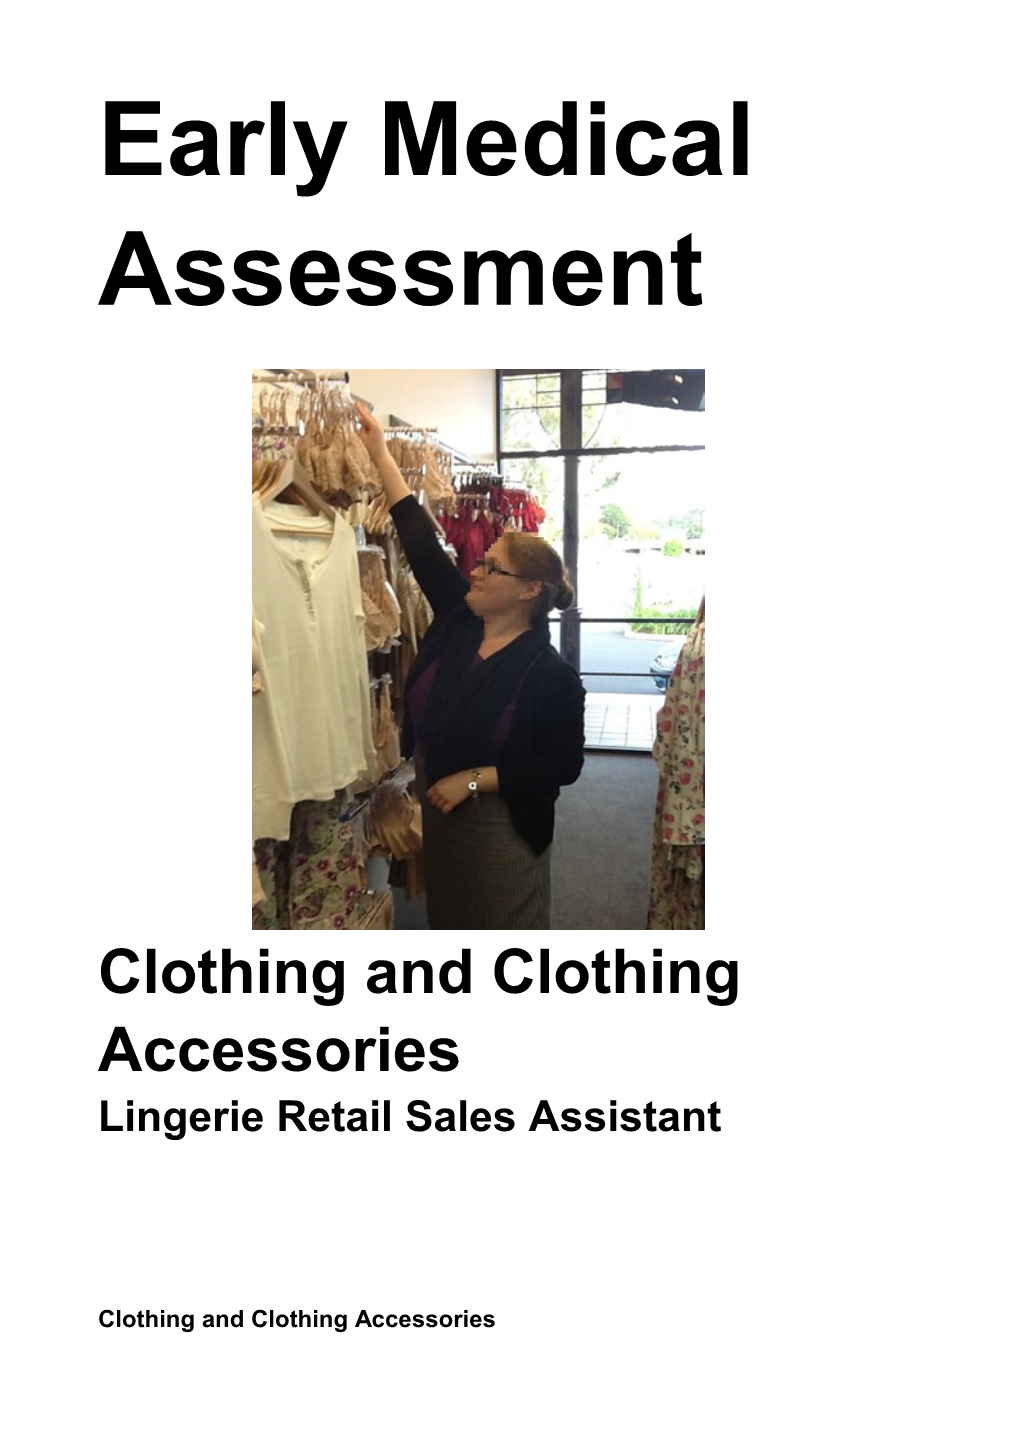 Clothing and Clothing Accessories Retailing - Sales Assistant - Lingerie